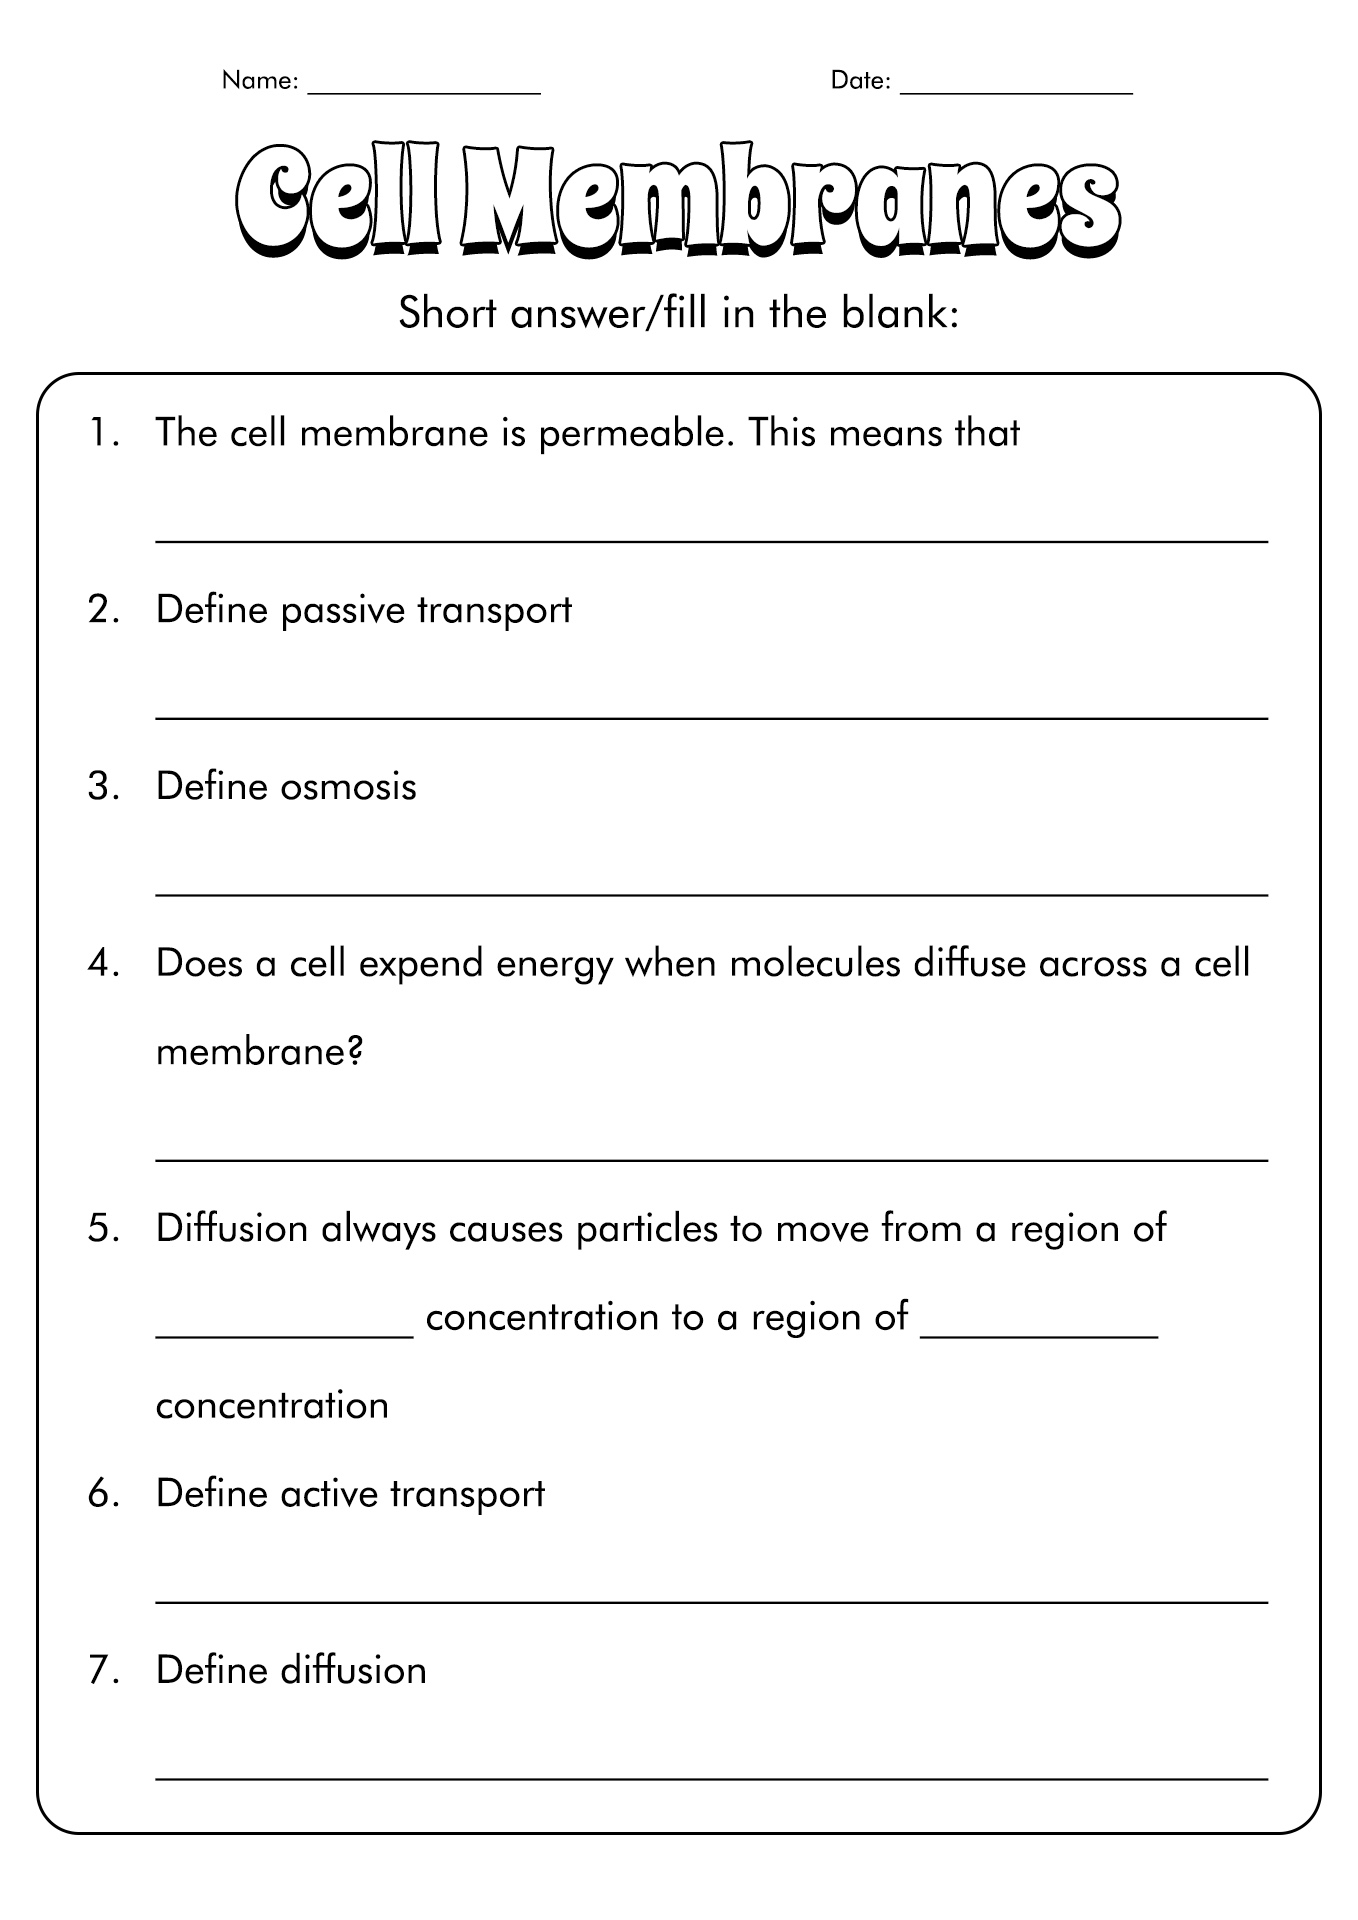 Cell Transport Diffusion and Osmosis Worksheet Image